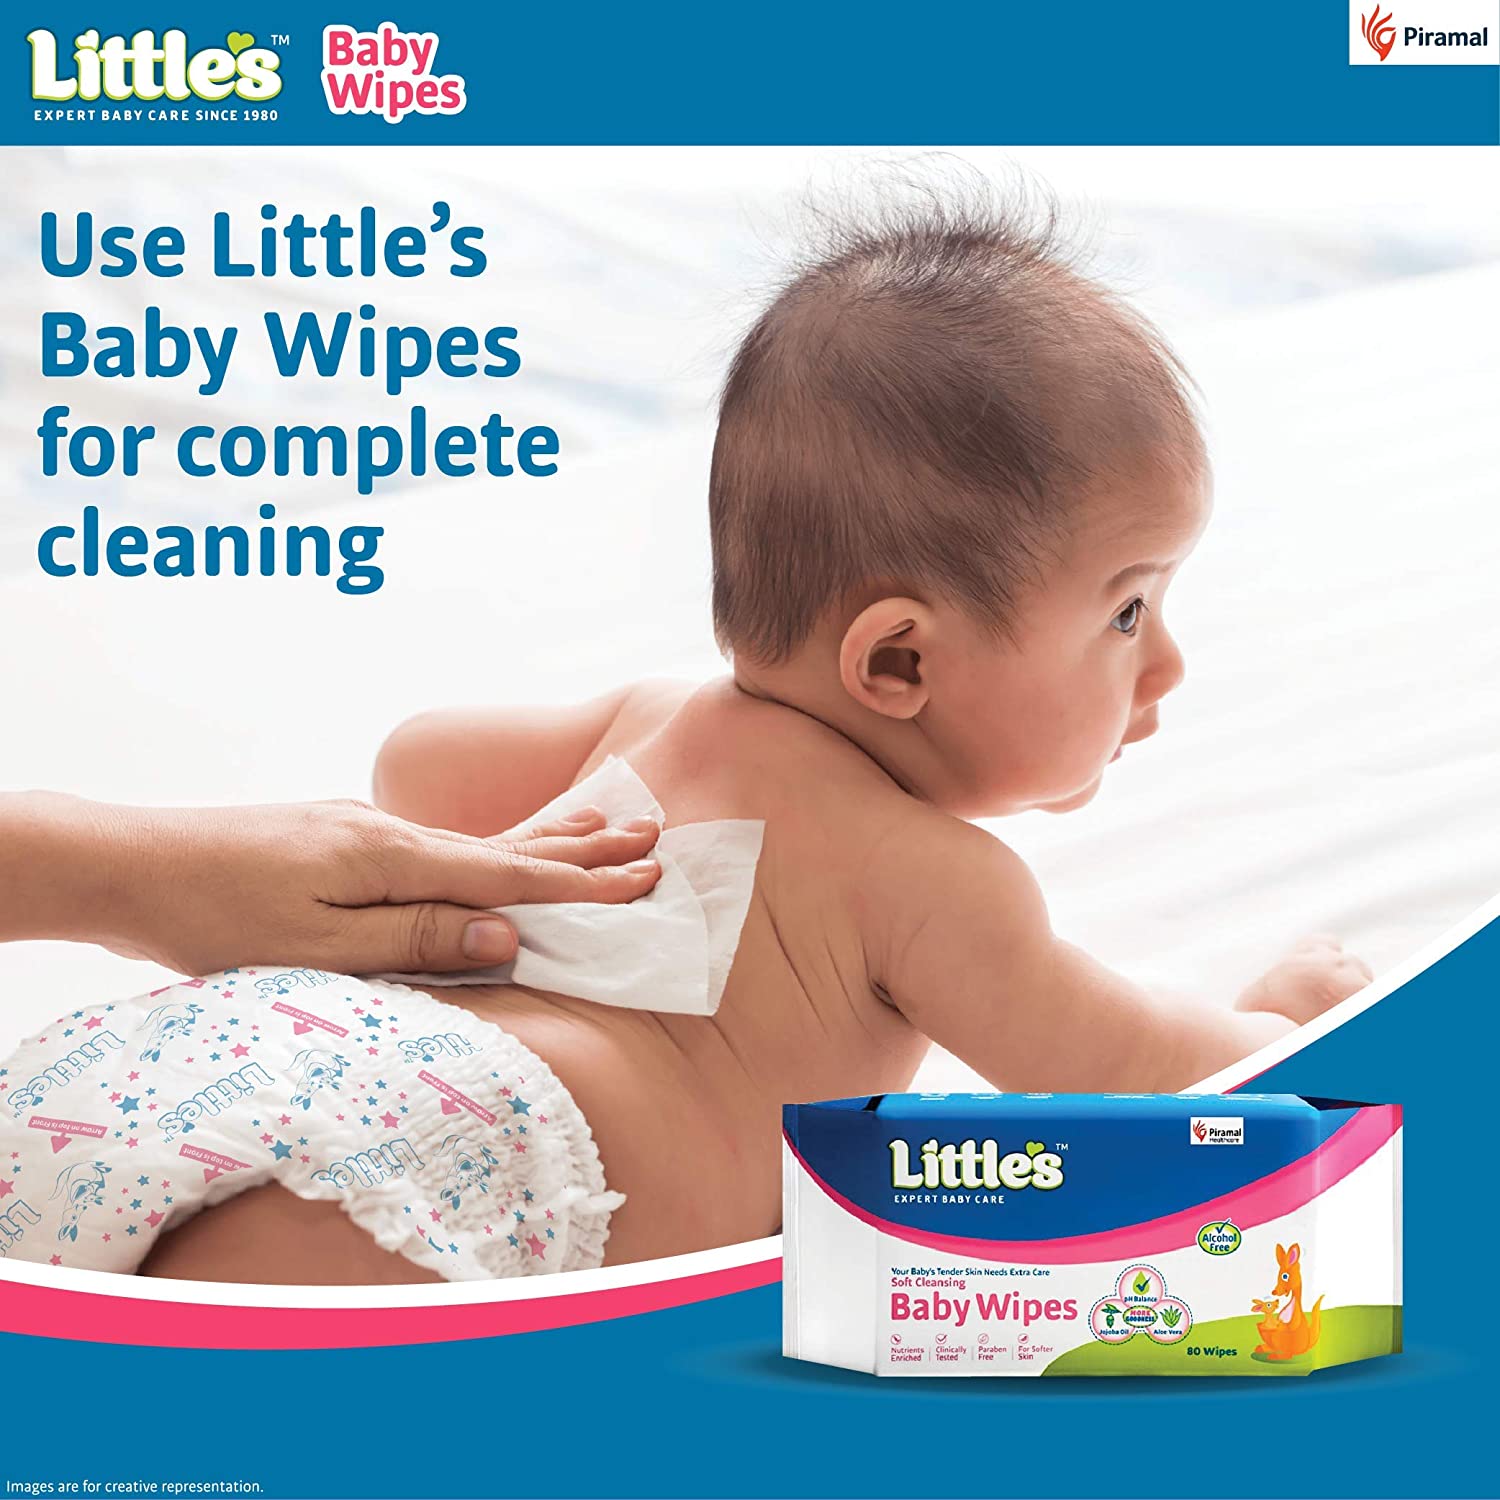 Little's Baby Pants Diapers with Wetness Indicator and 12 Hours Absorption